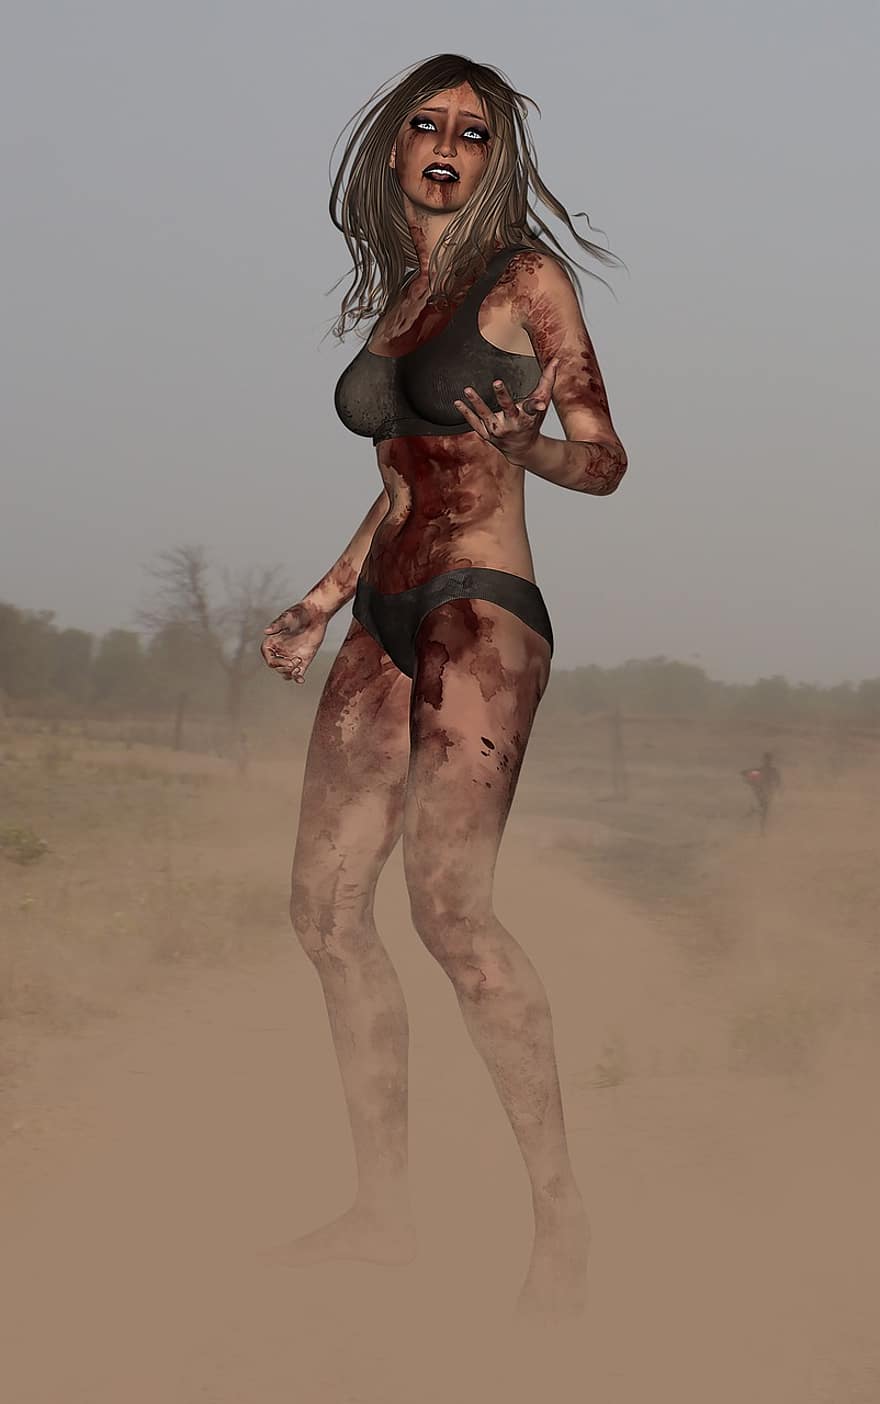 Dried Blood, Survivor, Disheveled, Walking, Dirt, Grime, Wound, Hurt, Horror, Confused, Woman